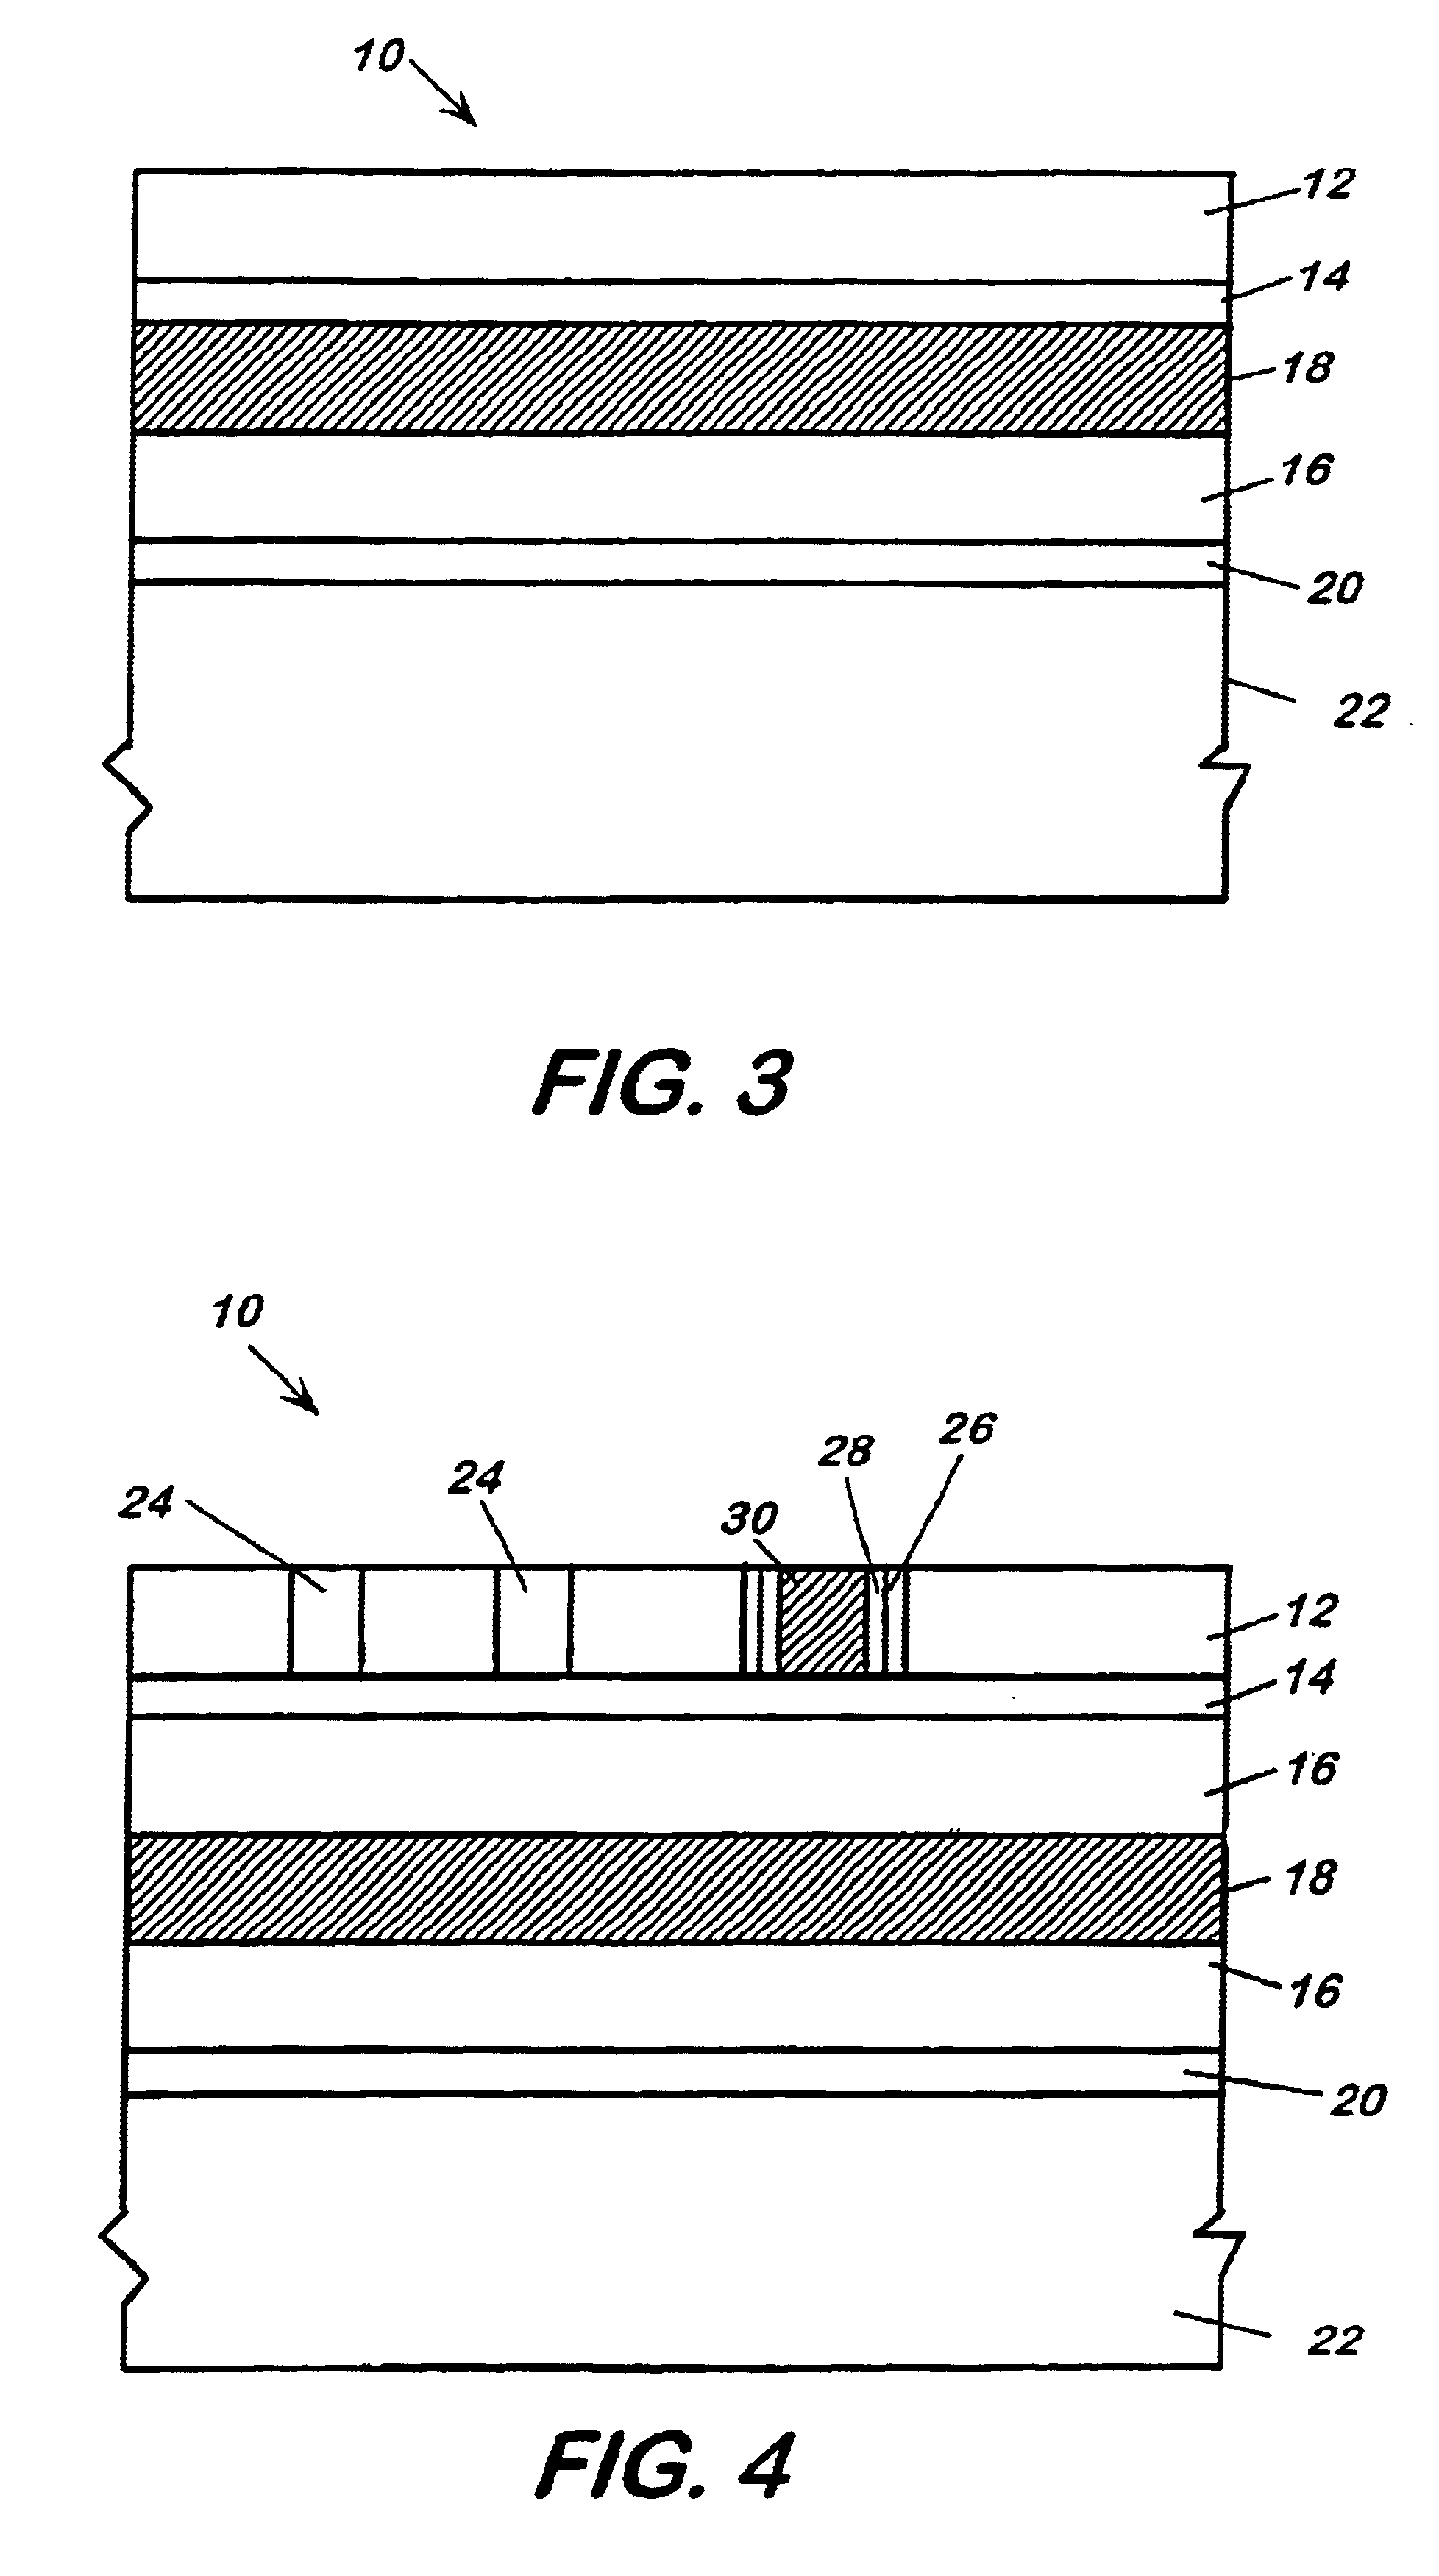 Semiconductor substrate incorporating a neutron conversion layer